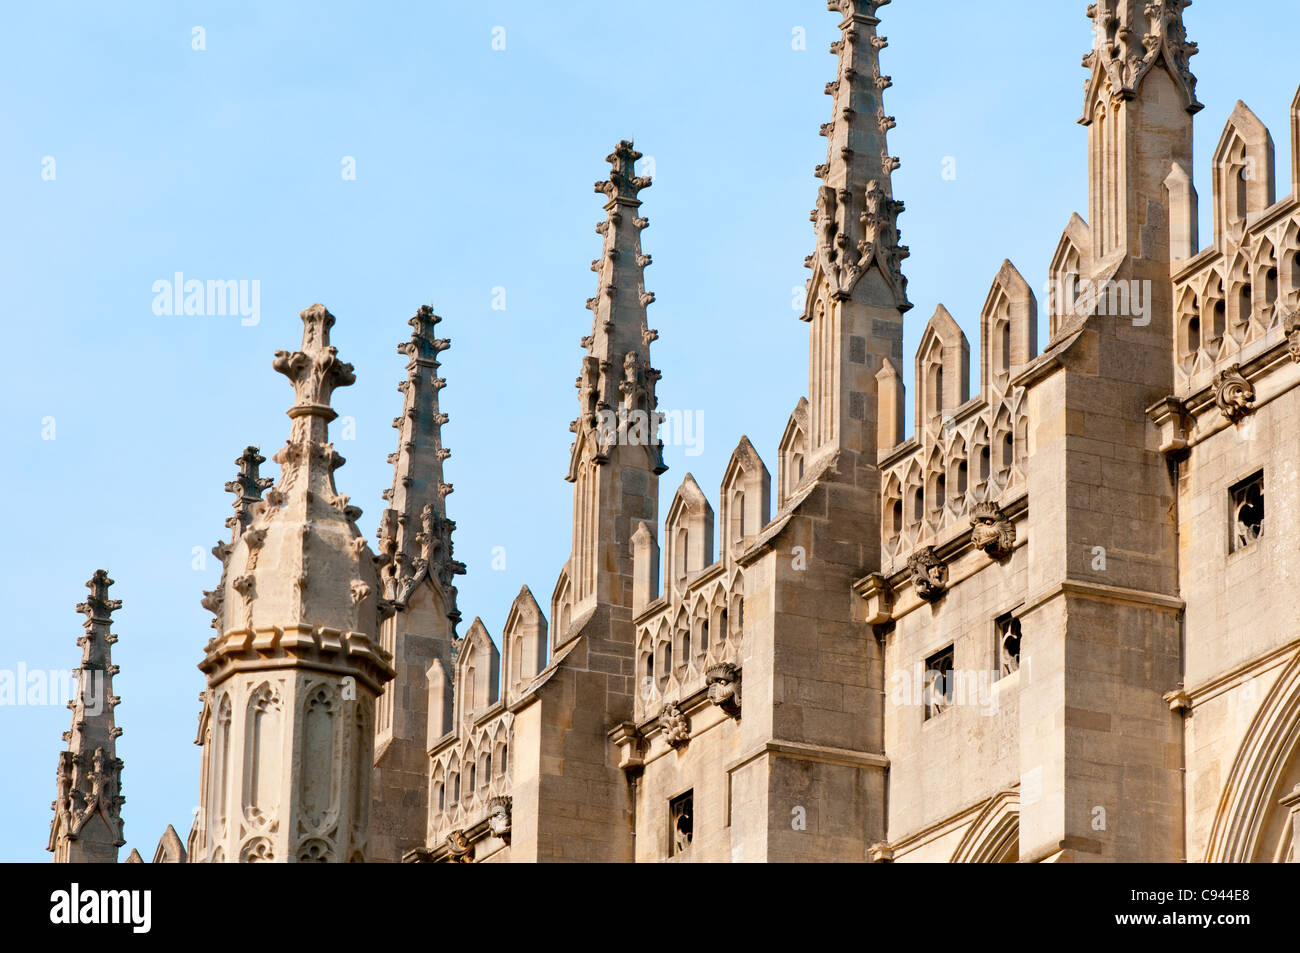 Detail of some of the stone work spires and gargoyles of King's College, Cambridge University. Stock Photo